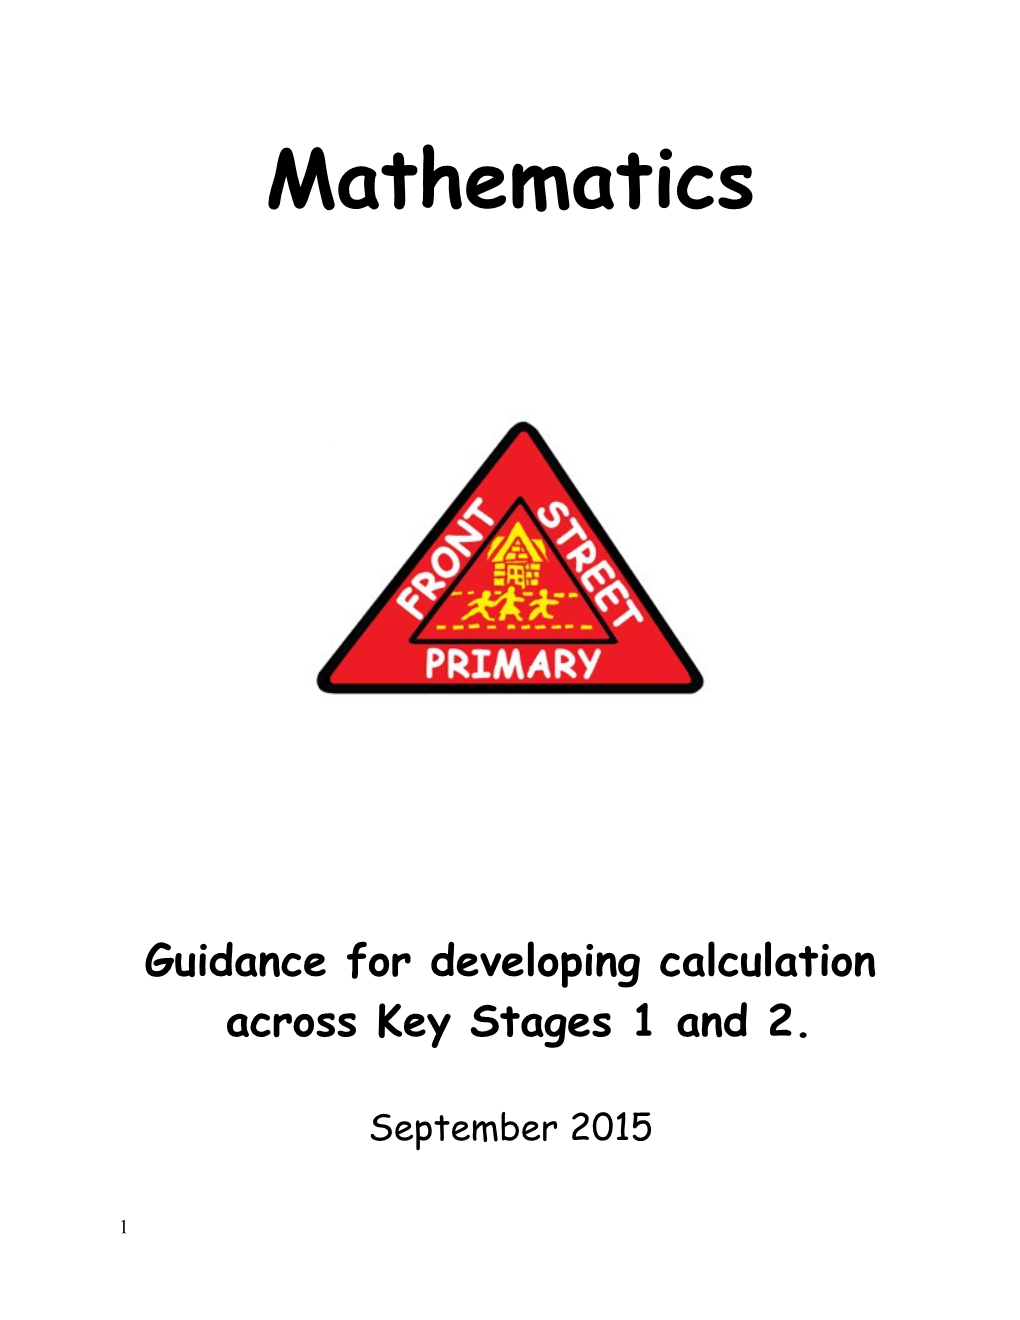 Guidance for Developing Calculation Across Key Stages 1 and 2